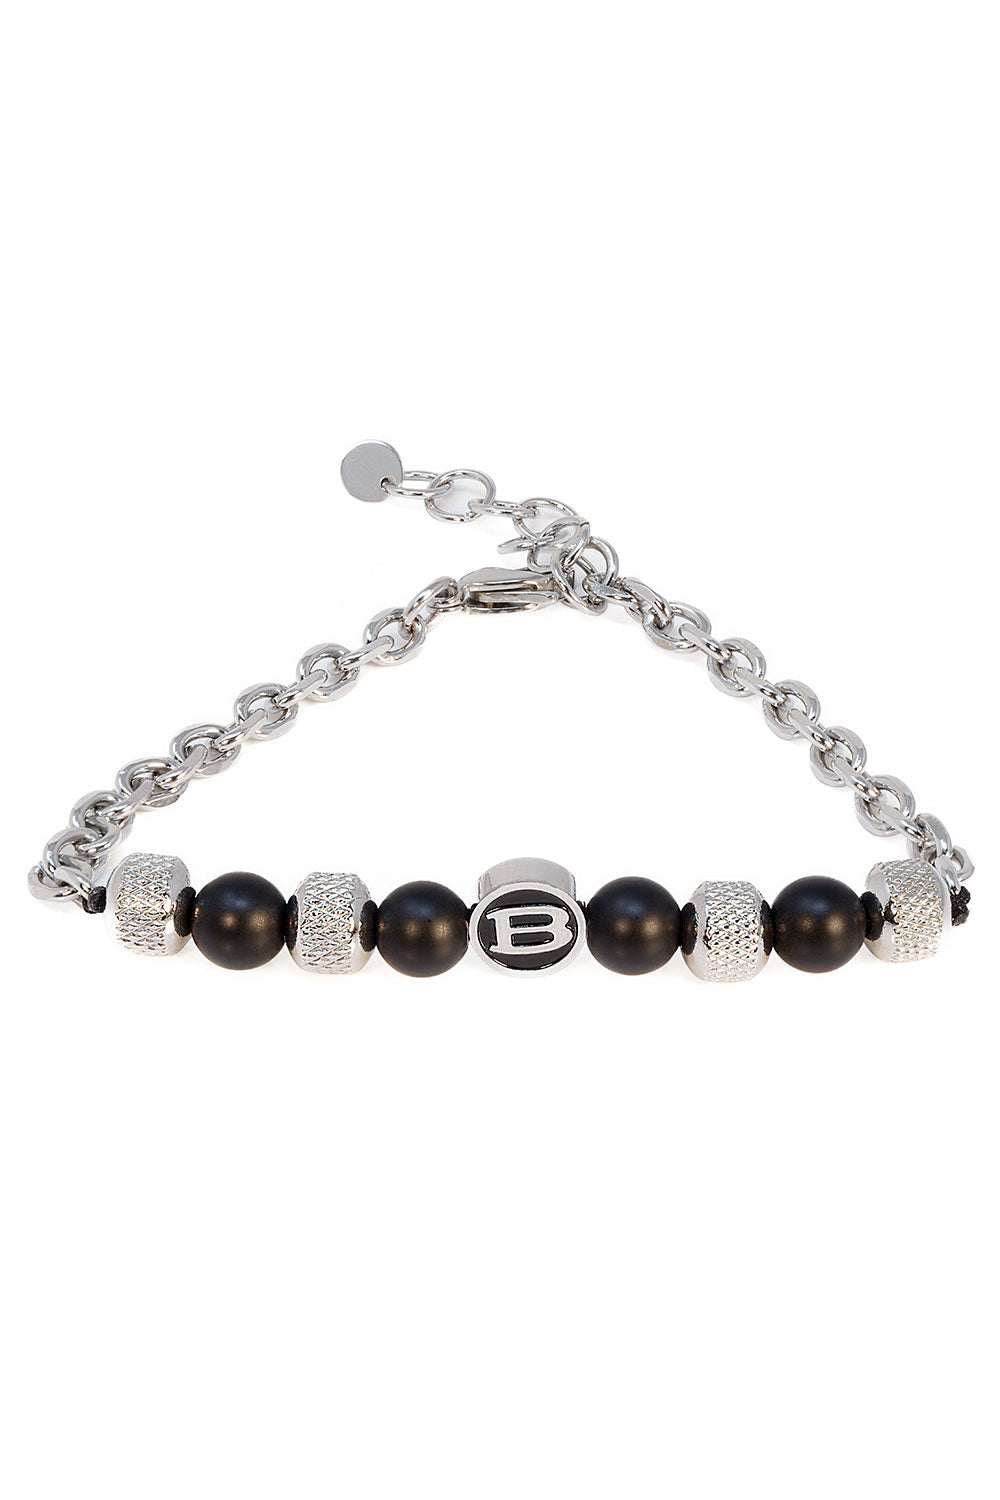 Barabas Unisex Obsidian Beads and Chains Bangles Bracelets 4BB05 Silver Black